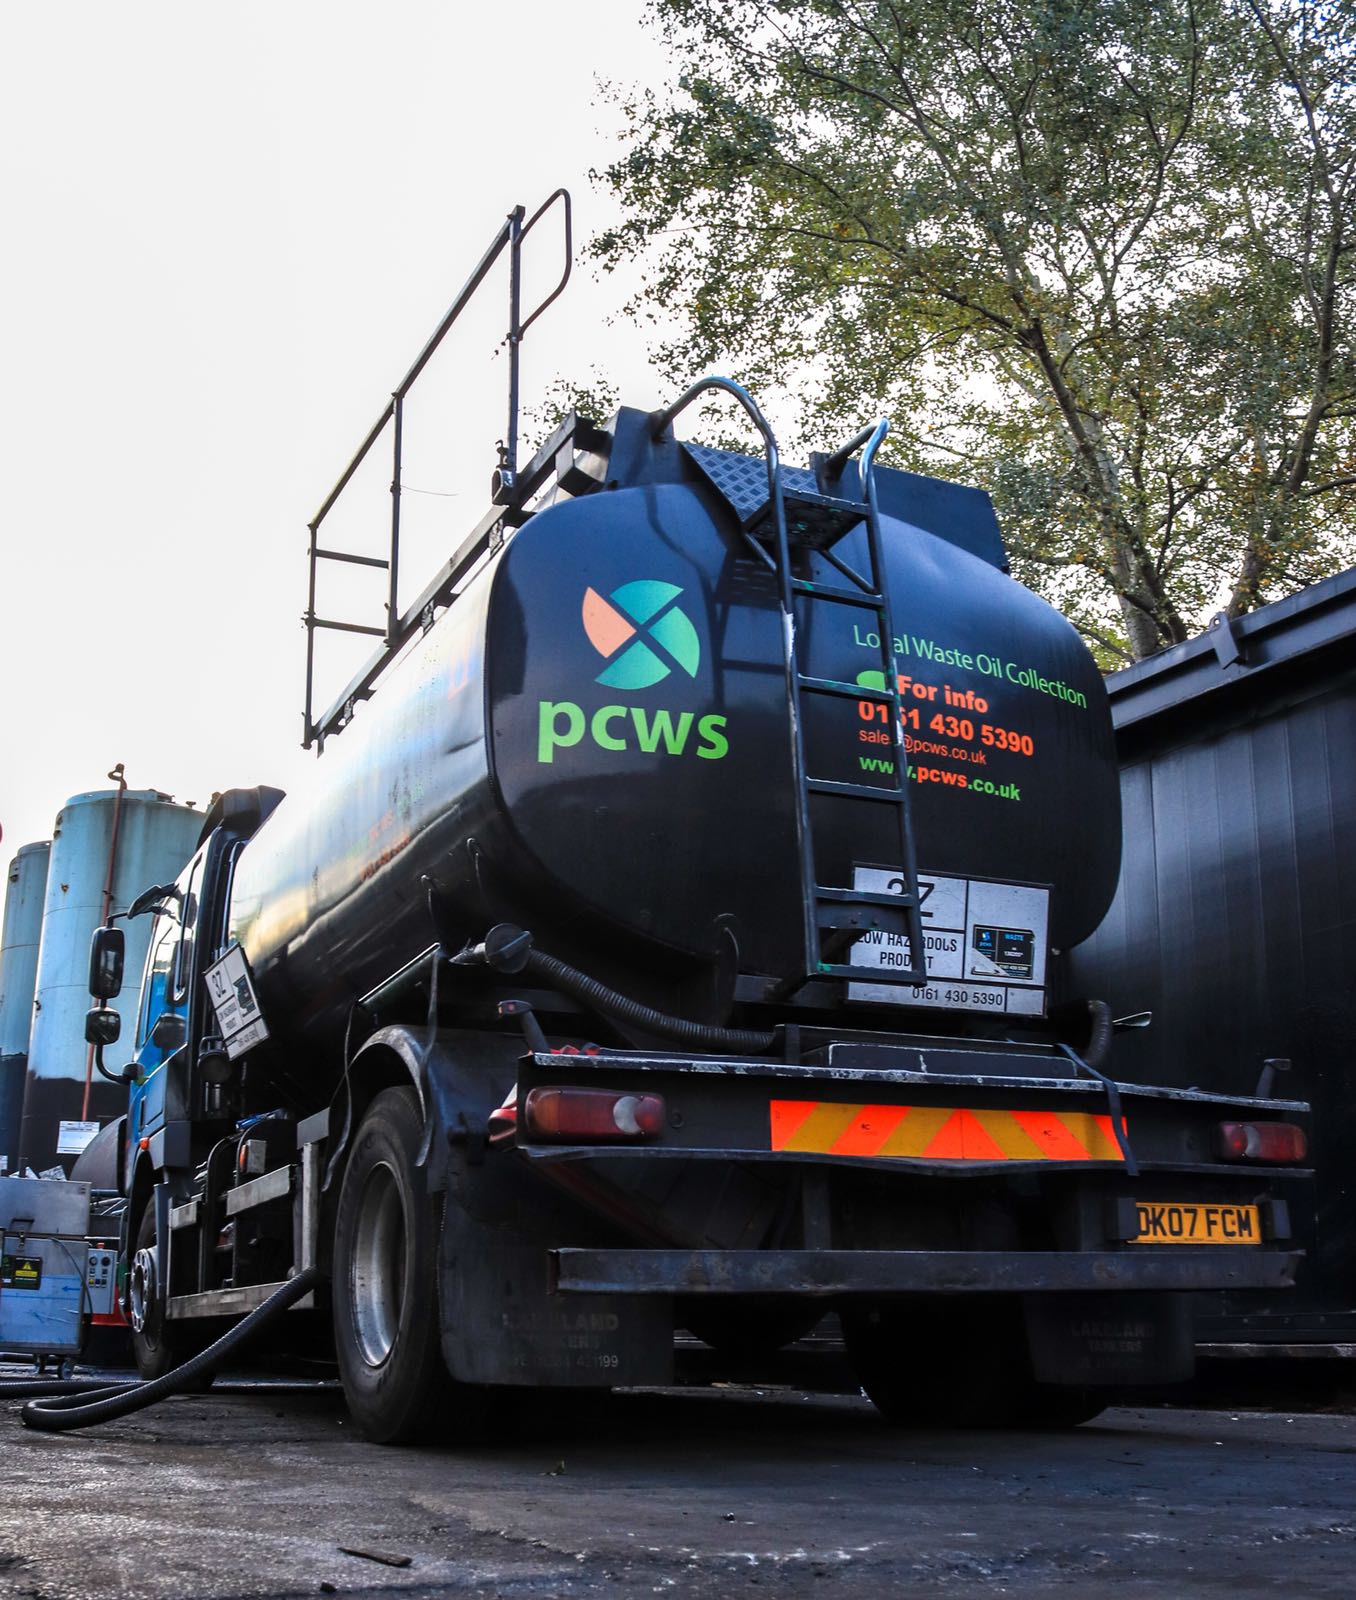 Waste Oil Collection online ordering avaliable